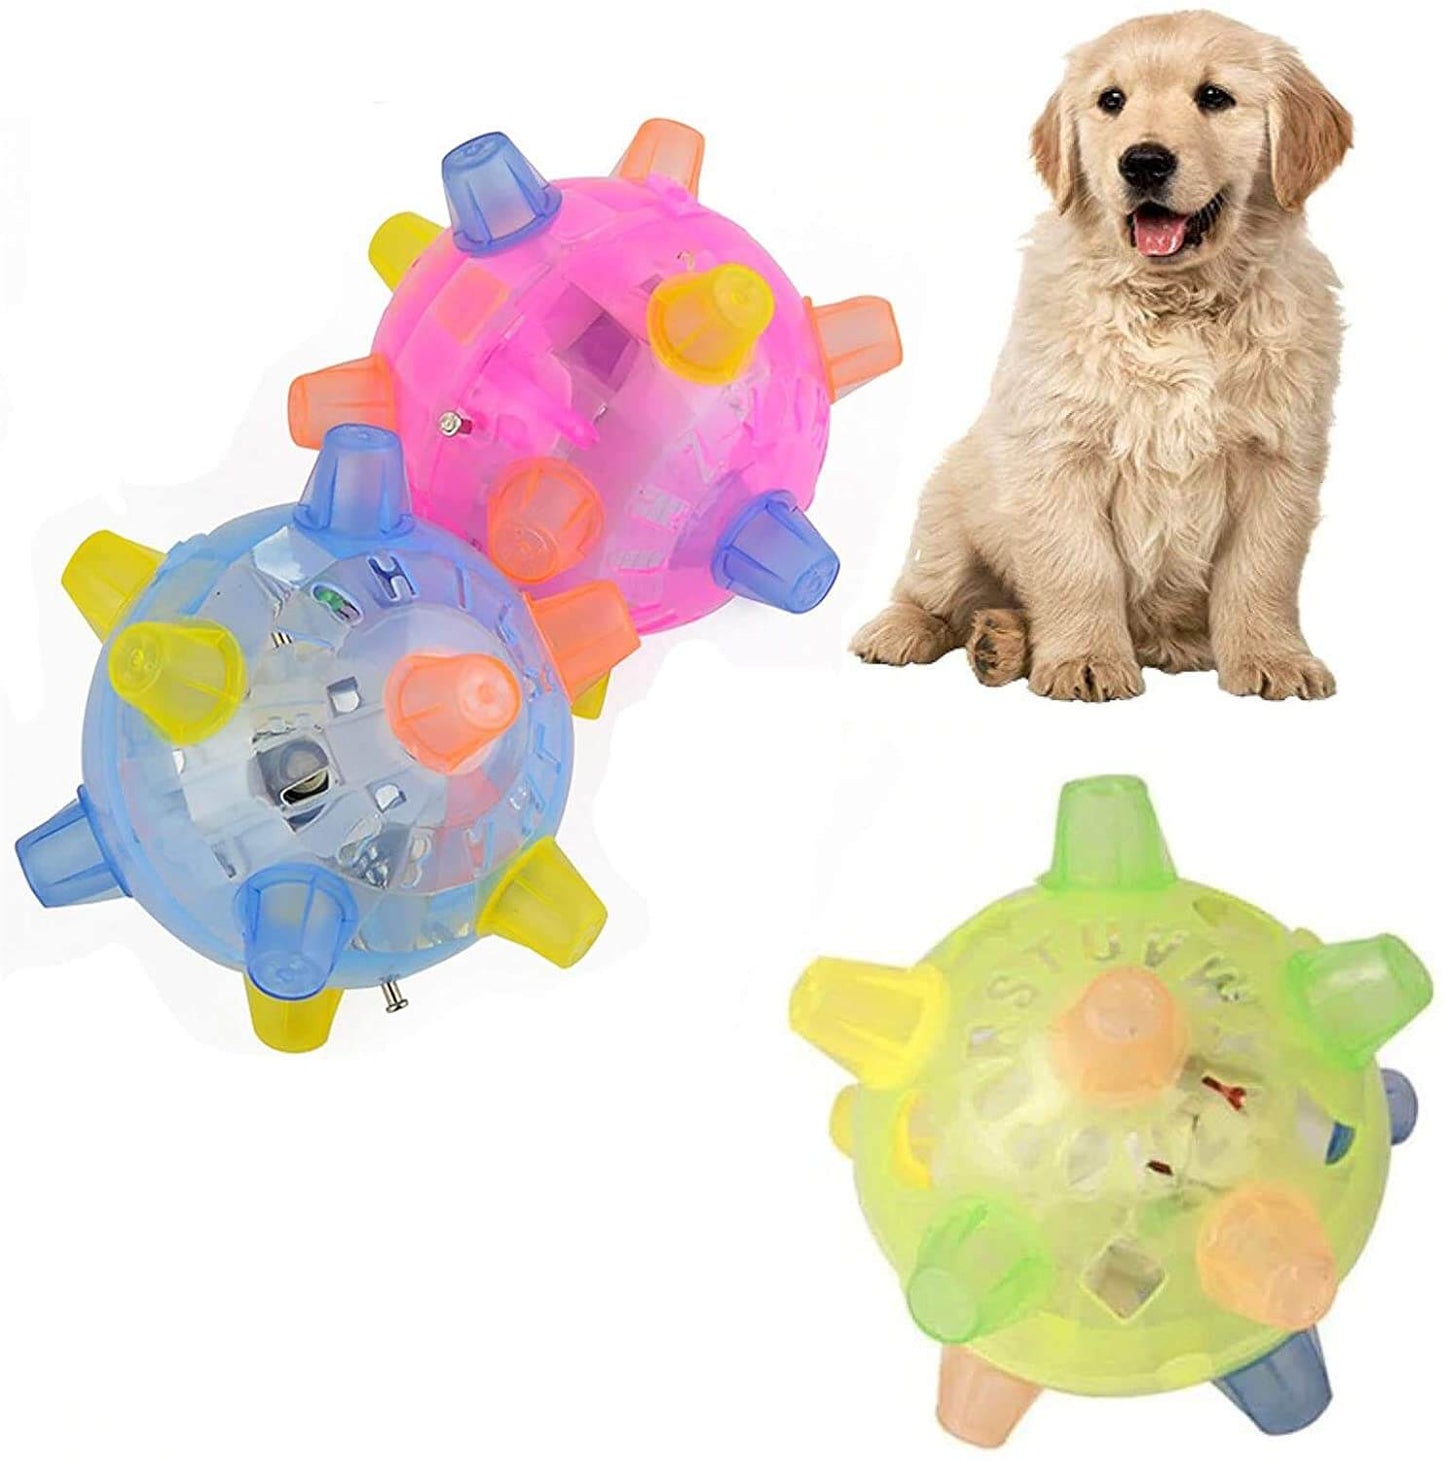 Jumping Activation Ball for Dogs/Details